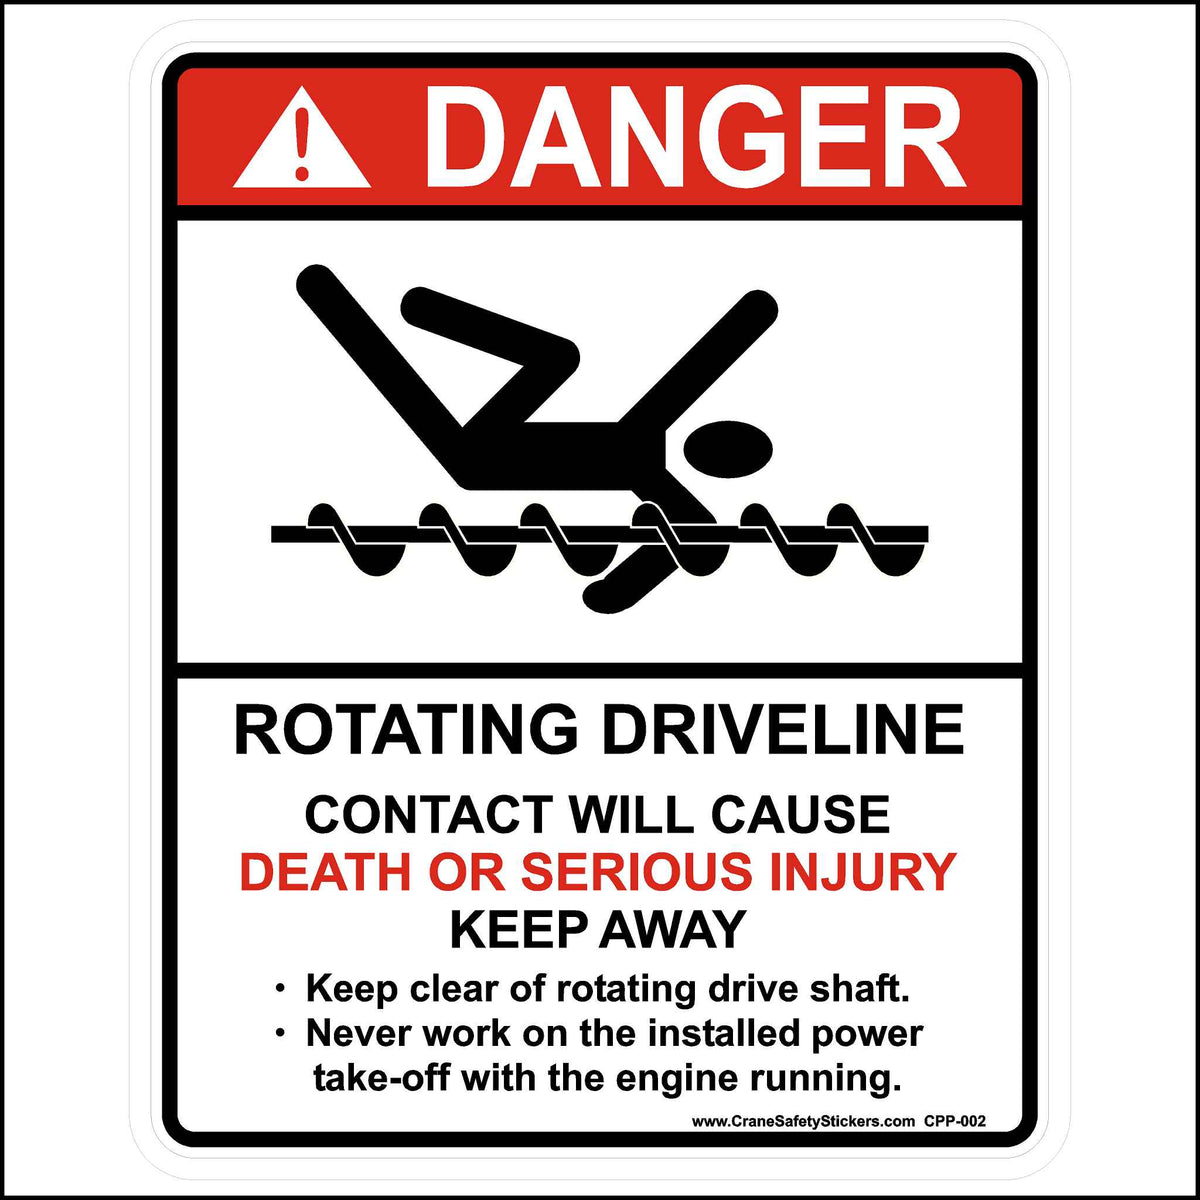 This Rotating Driveline Sticker and PTO Shaft Safety Sticker Is Printed With. DANGER ROTATING DRIVELINE CONTACT WILL CAUSE DEATH OR SERIOUS INJURY KEEP AWAY Keep clear of the rotating drive shaft. Never work on the installed power take-off with the engine running.